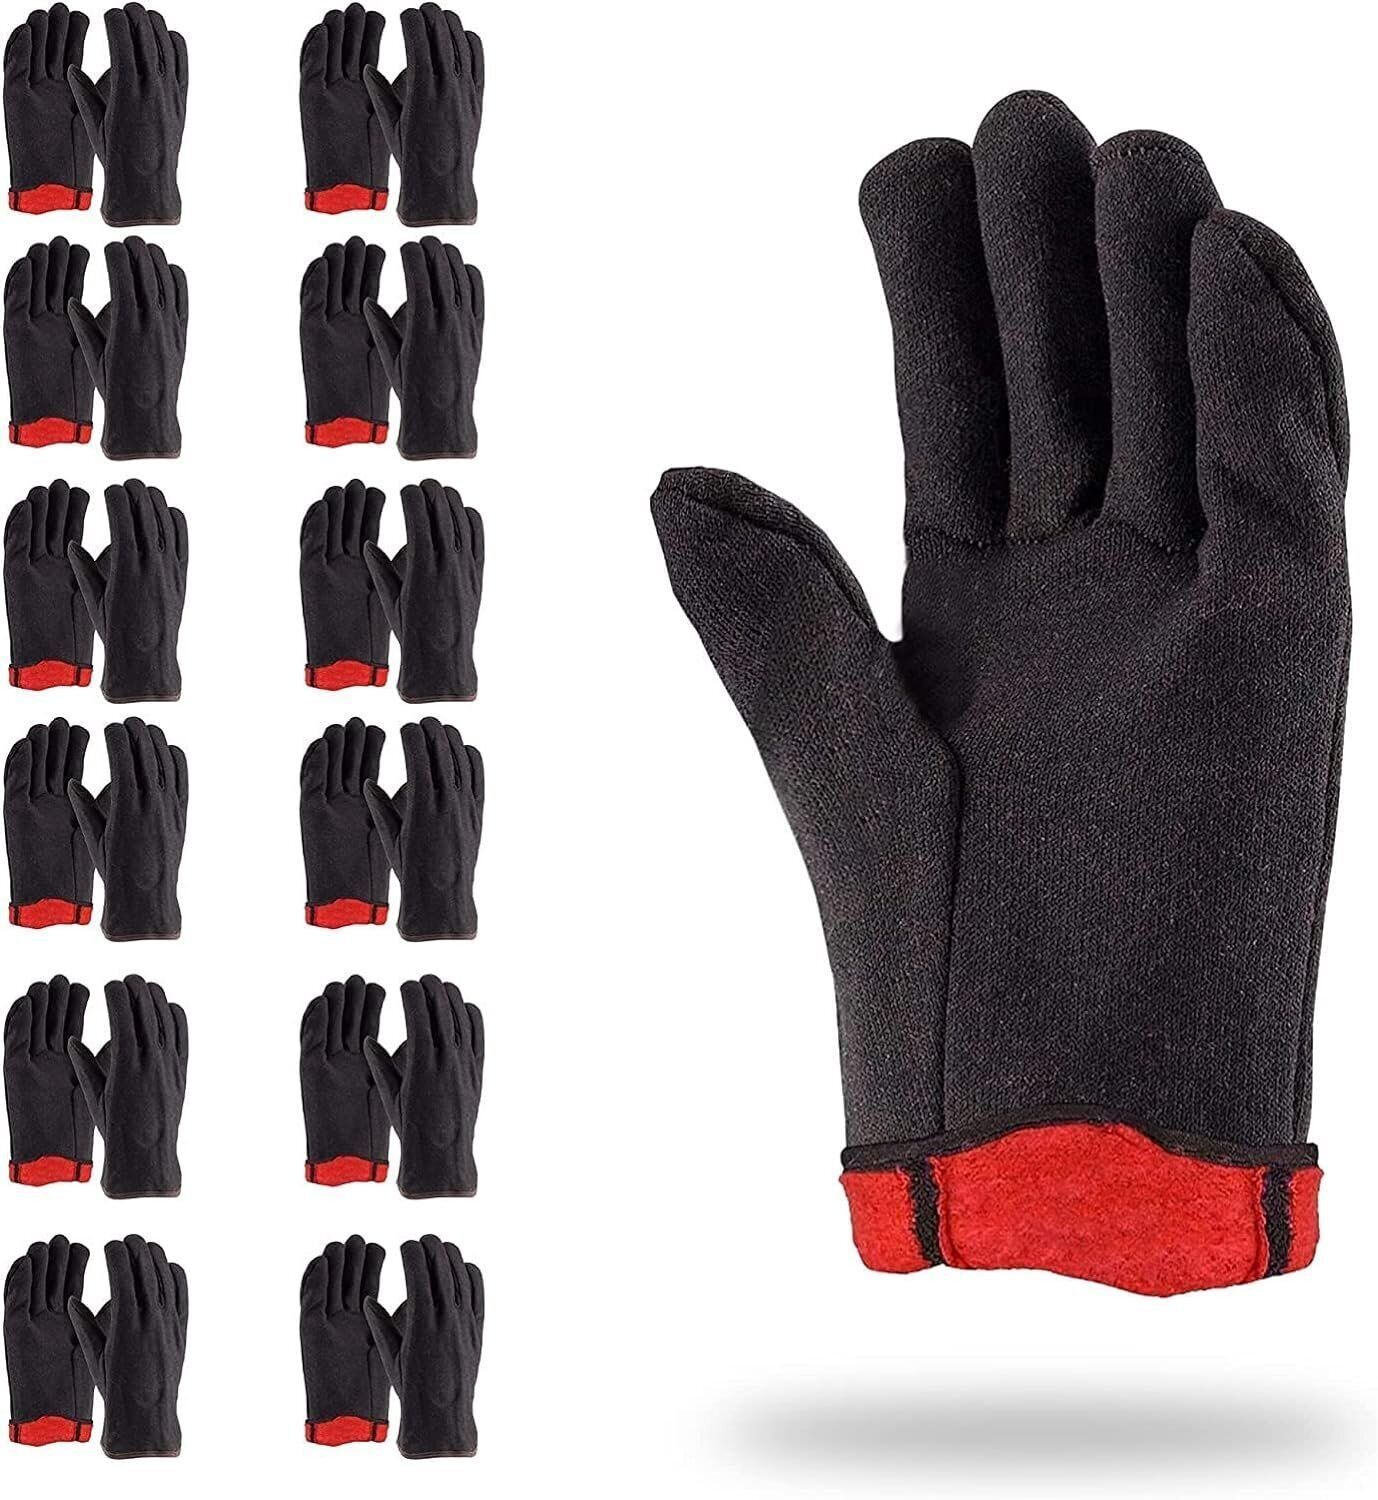 Primary image for 12 pcs Red Fleece Lined Brown Jersey Gloves 9.5" /w Open Cuff, Gunn Cut Pattern